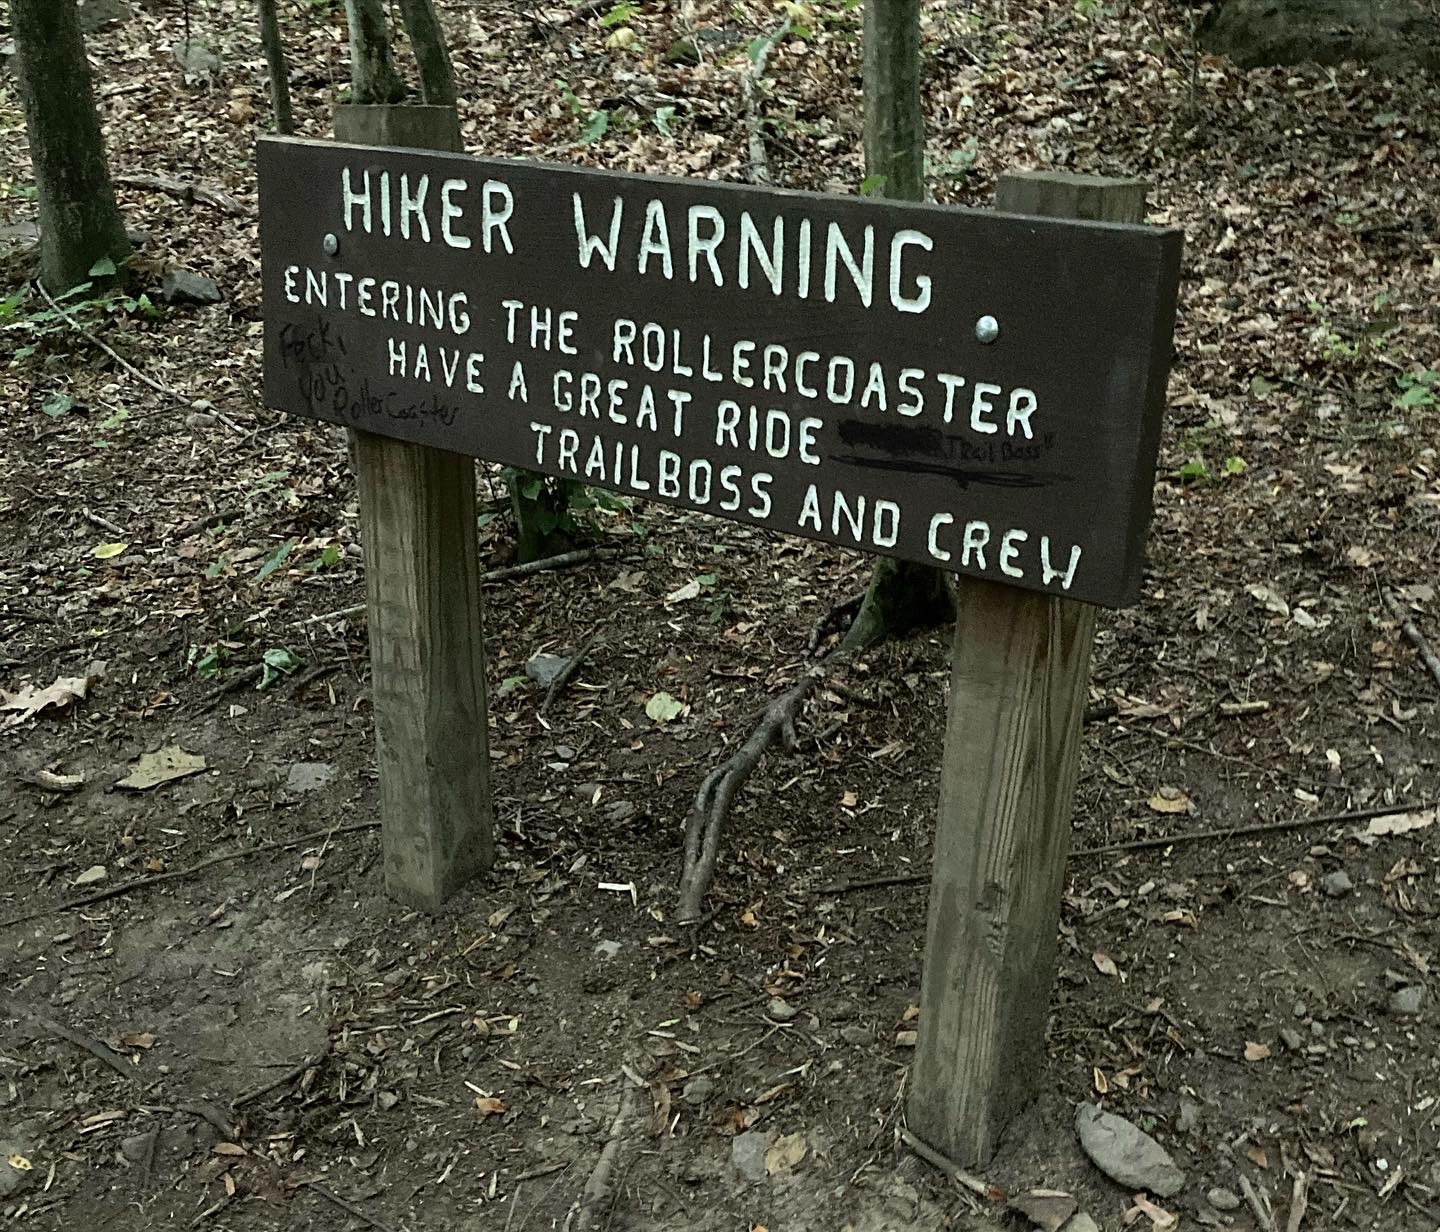 This picture shows the warning at the south end of the Virginia roller coaster saying, “Hiker Warning: entering the roller coaster. Have a great ride. Trailboss and the Crew”